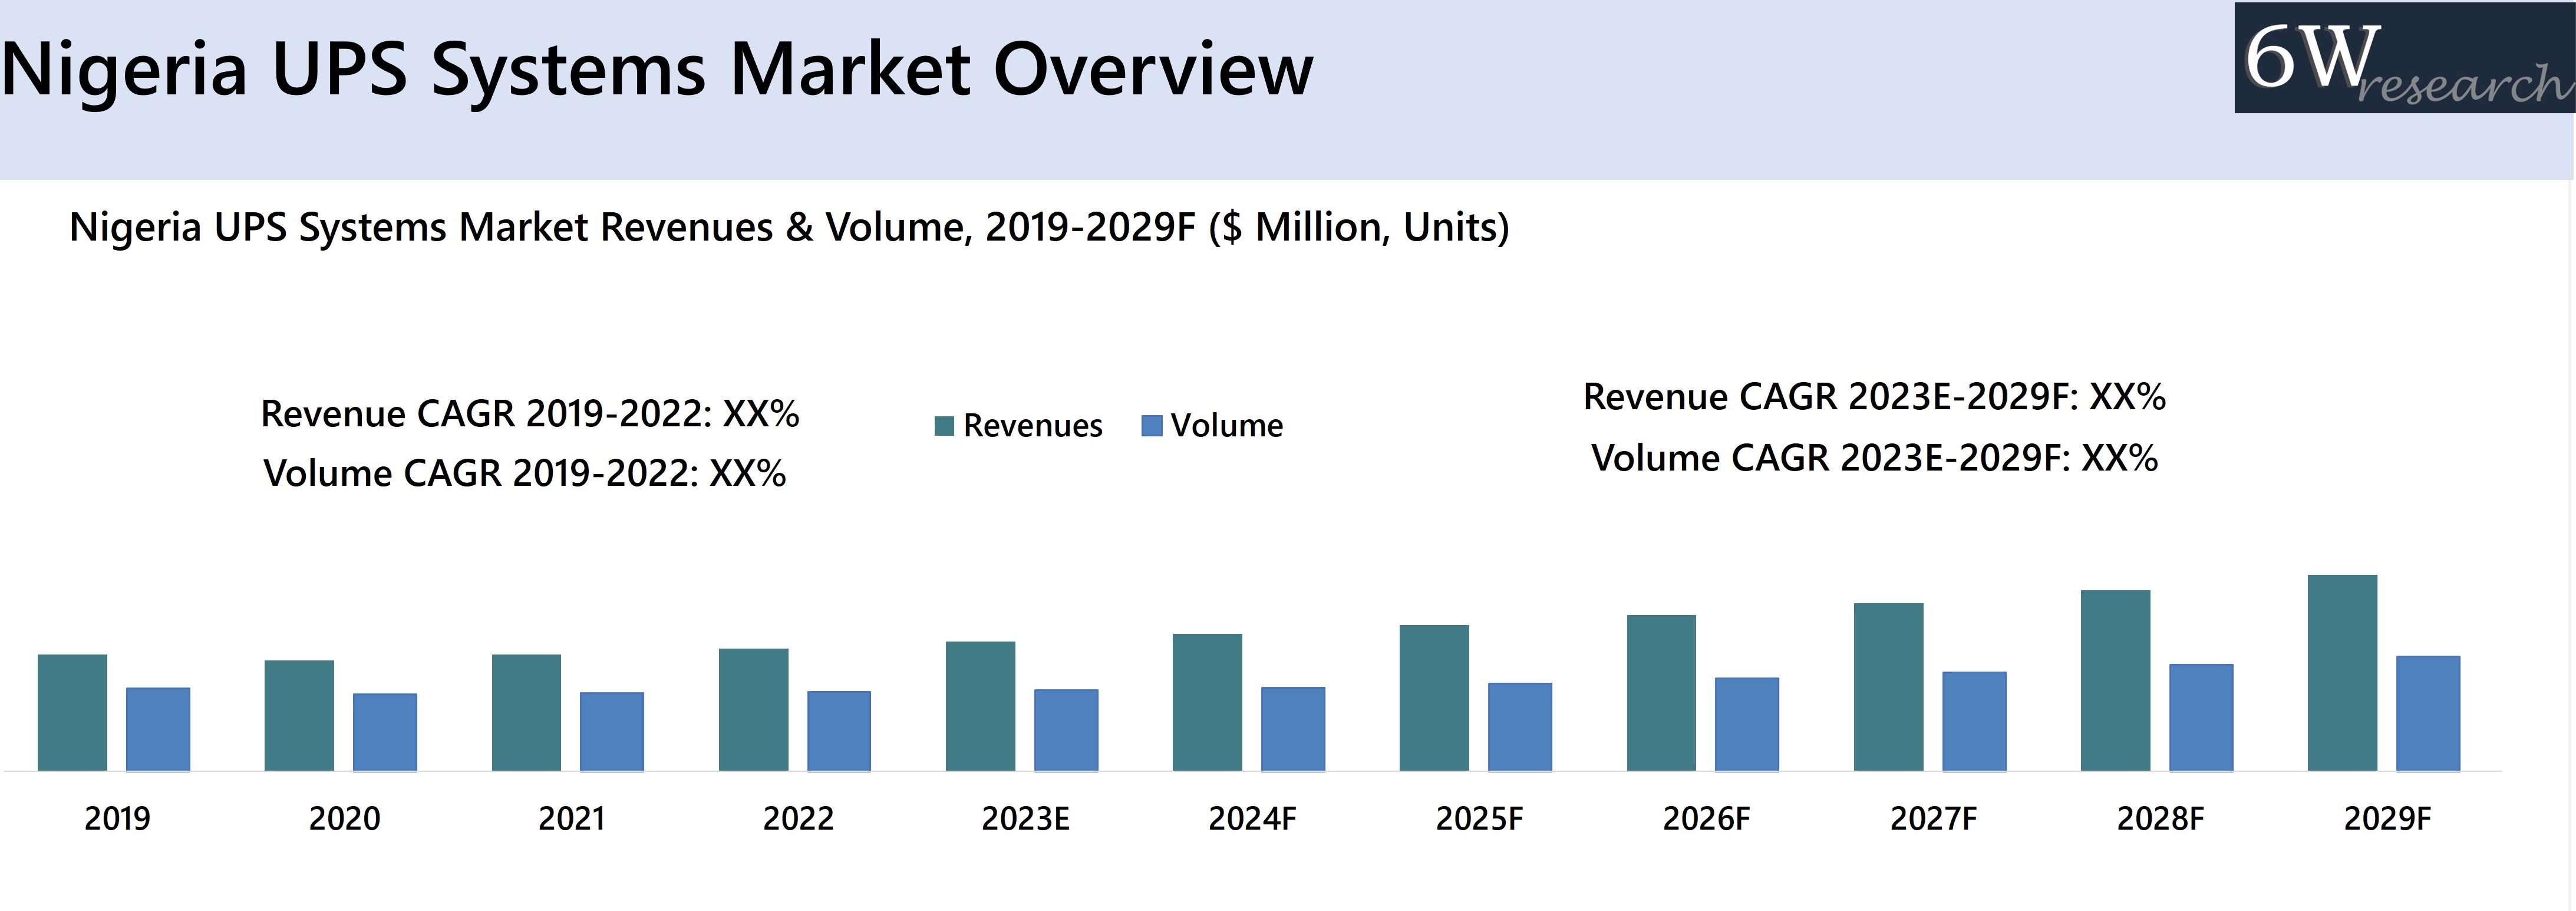 Nigeria UPS Systems Market Overview